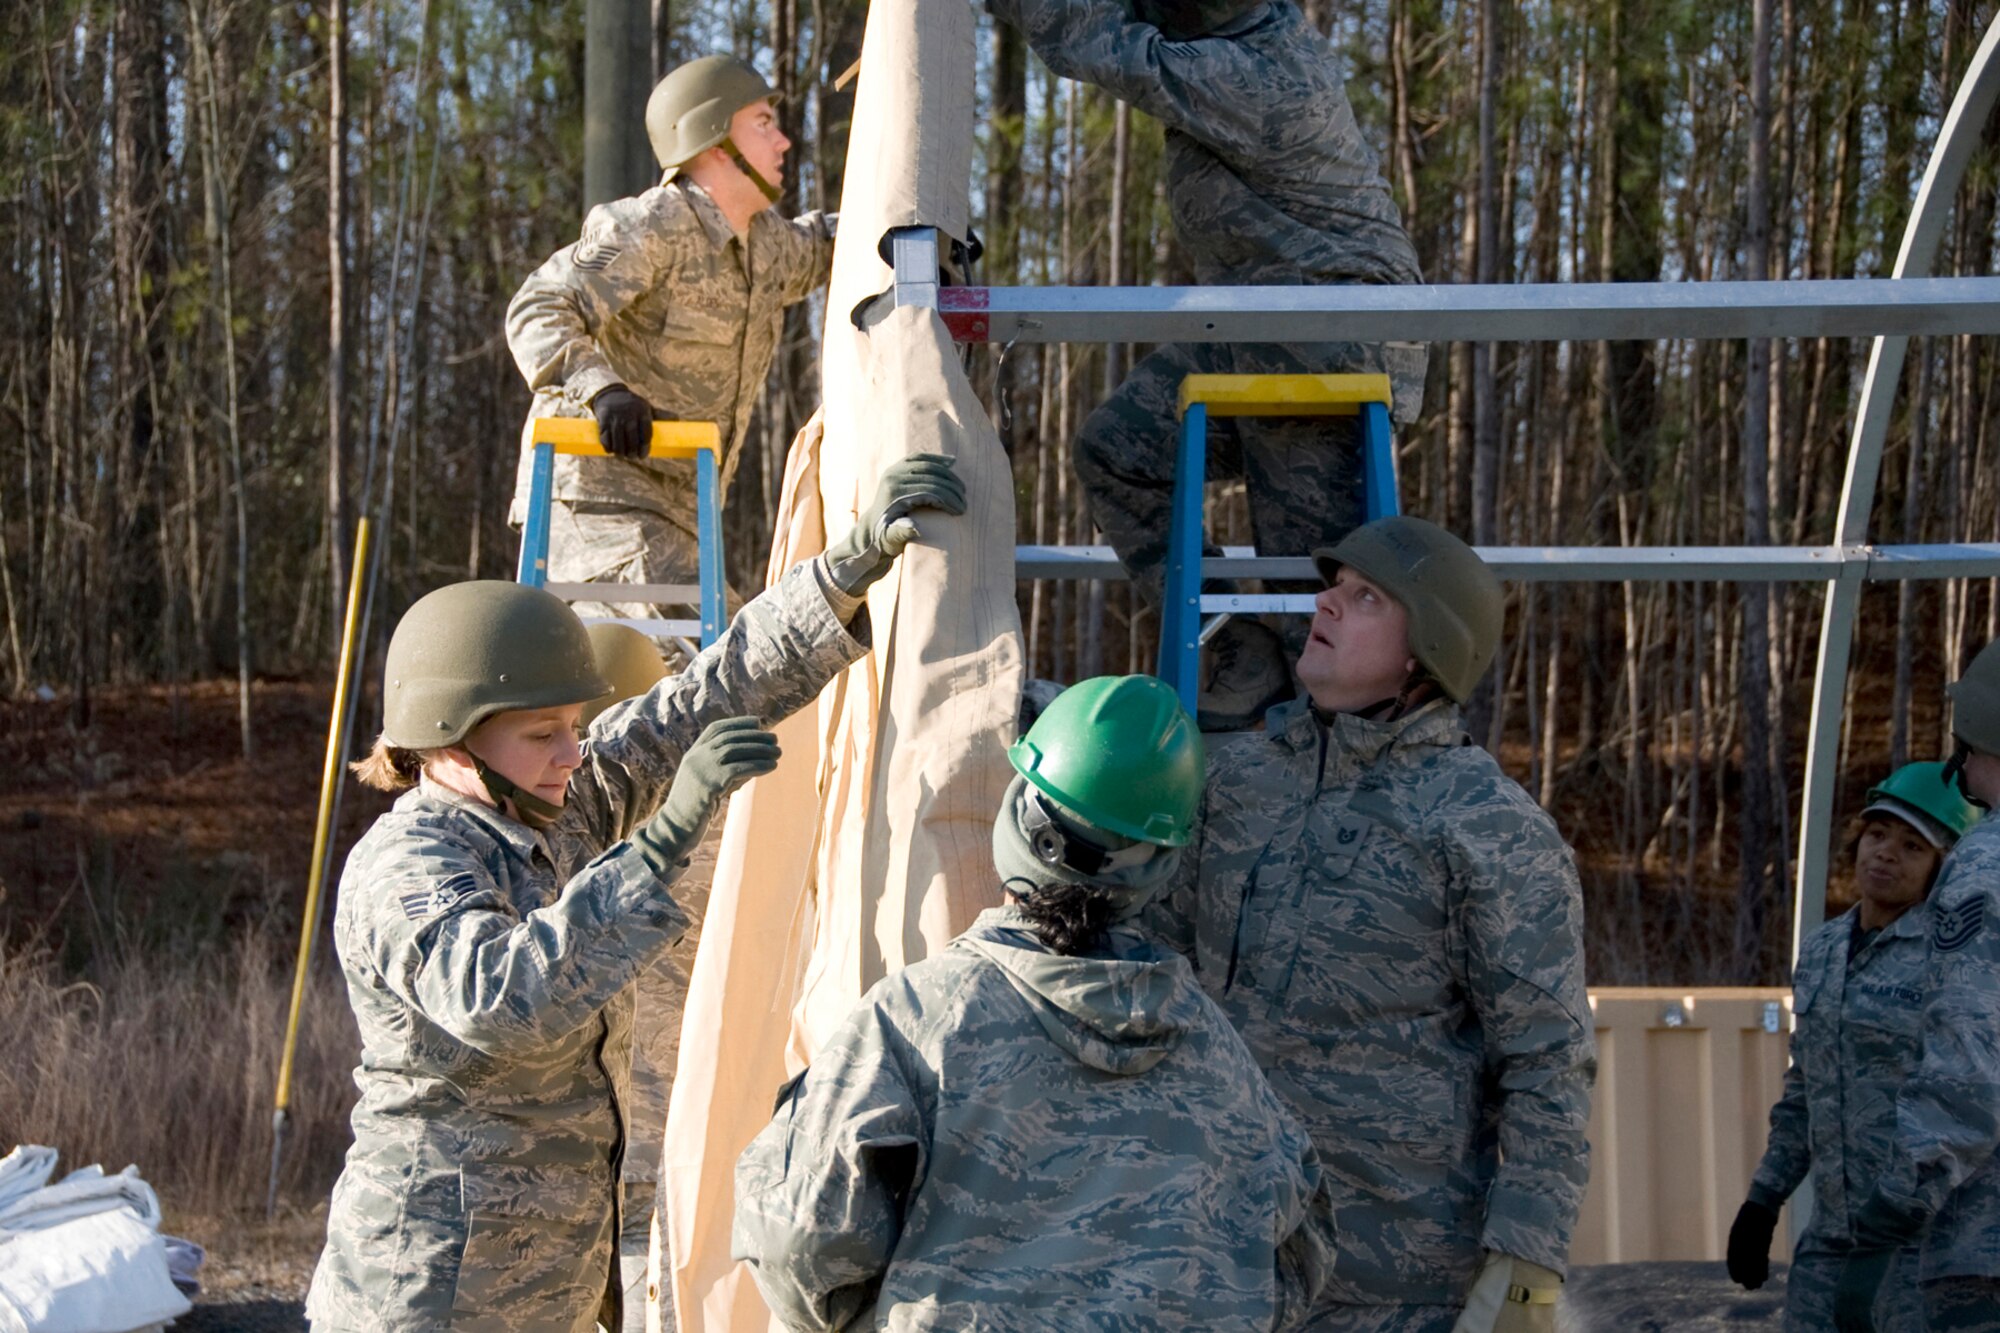 Tech. Sgt. Aaron Alden, Tech. Sgt. Thomas Bergl and Senior Airman Holly Kneisl work with other Air Force members to construct the front wall of a SSS structure during the Silver Flag exercise.  Airmen from the 148th Fighter Wing Force Support Squadron participated in a weeklong contingency operations training exercise from February 18-25 at Dobbins Air Reserve Base.  (U.S. Air Force photo by Staff Sgt. Paul Santikko)

http://www.minnesotanationalguard.org/press_room/e-zine/articles/index.php?item=3688